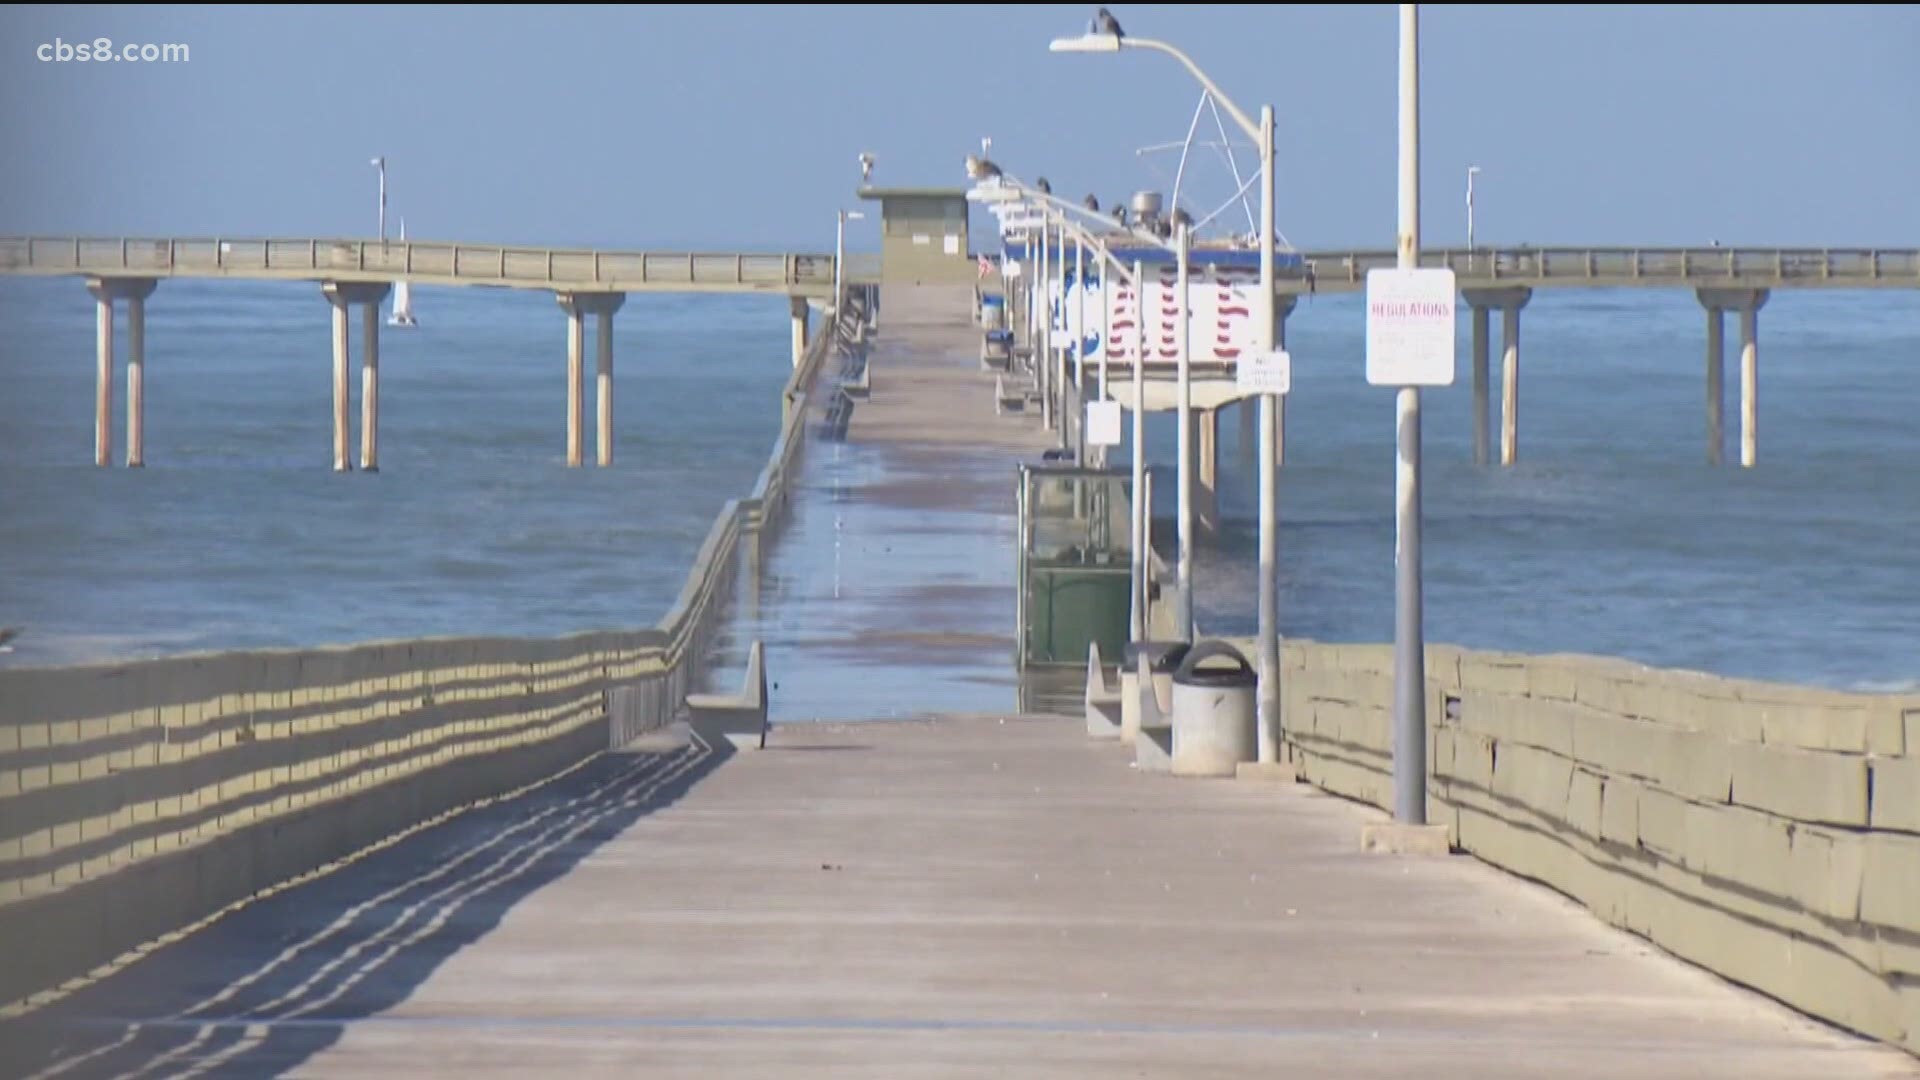 The future of the Ocean Beach pier has been in question for some time and a report on it earlier this year indicated repairs would be costly.